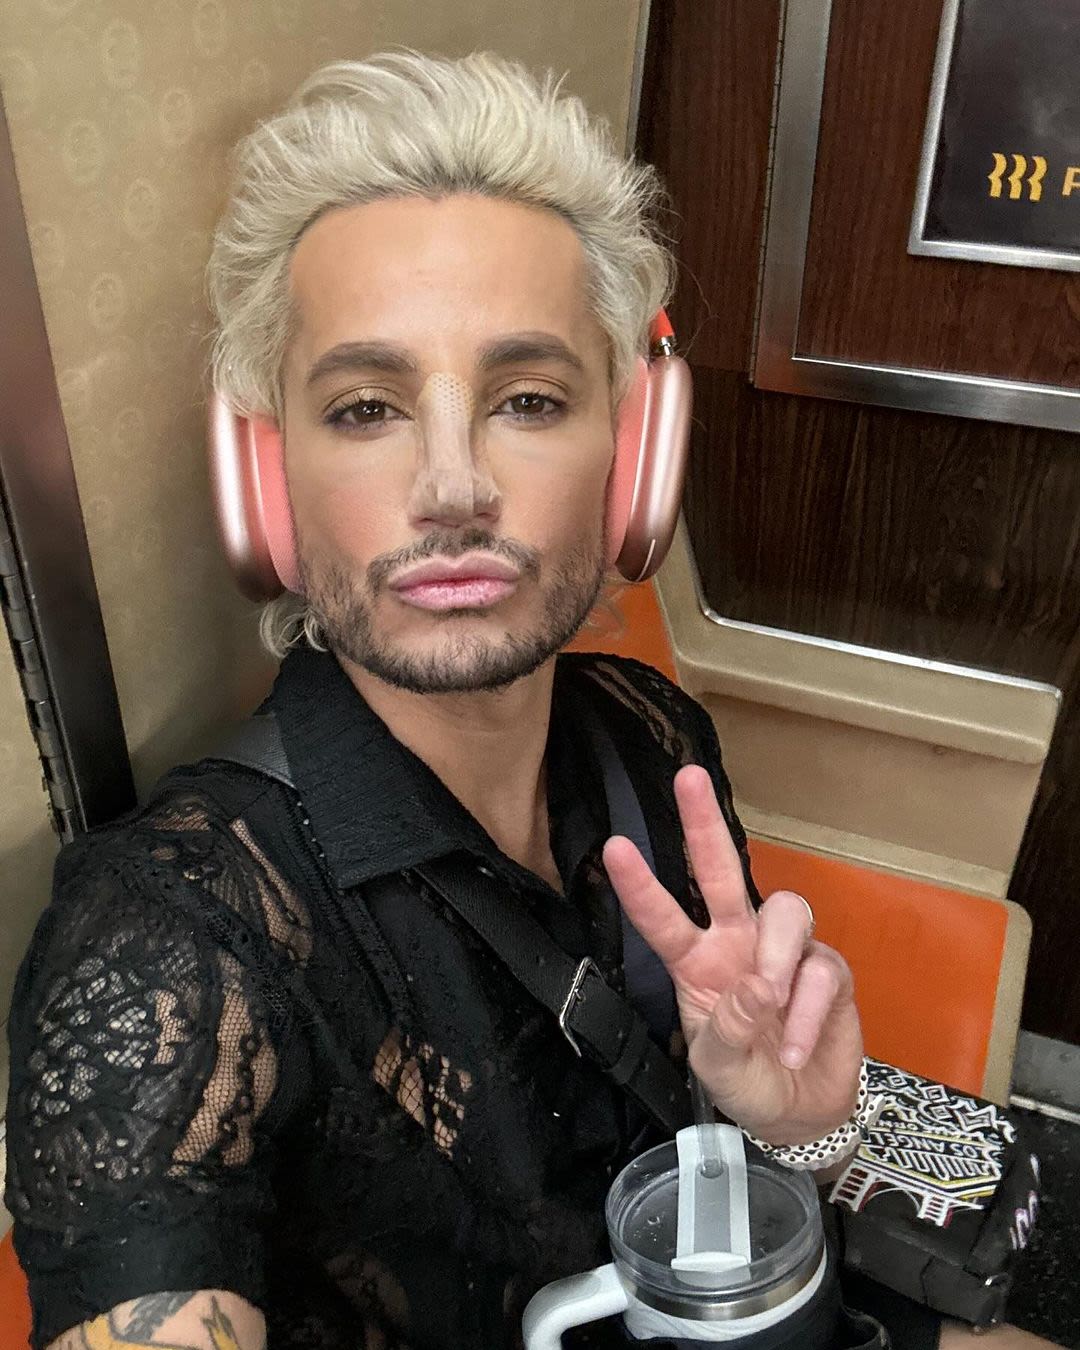 Ariana Grande’s Brother Frankie Debuts ‘New Nose’ in Public After Plastic Surgery: Photos